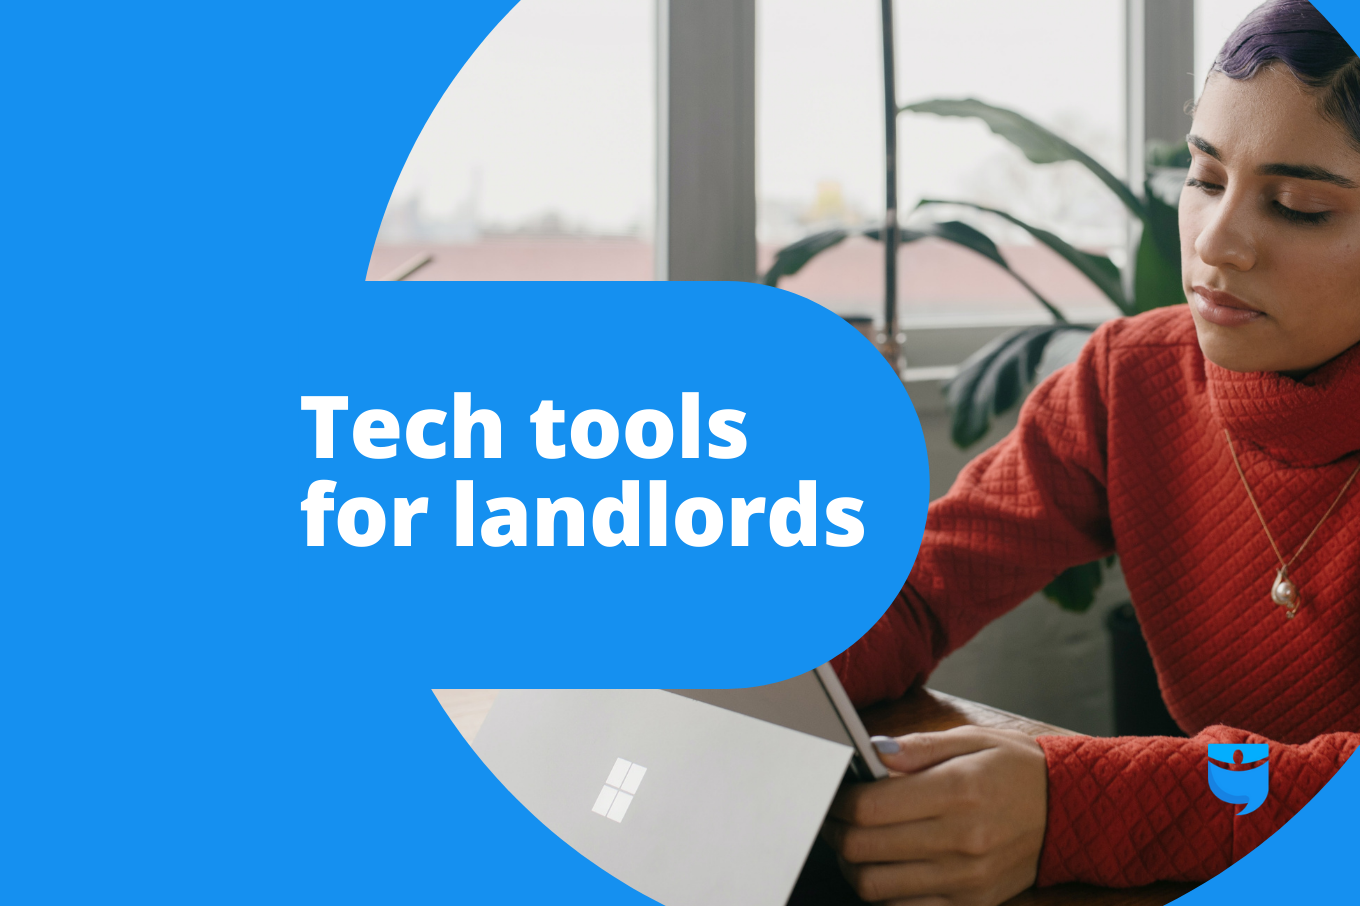 6 Tech Tools That Make a Landlord’s Life Easier